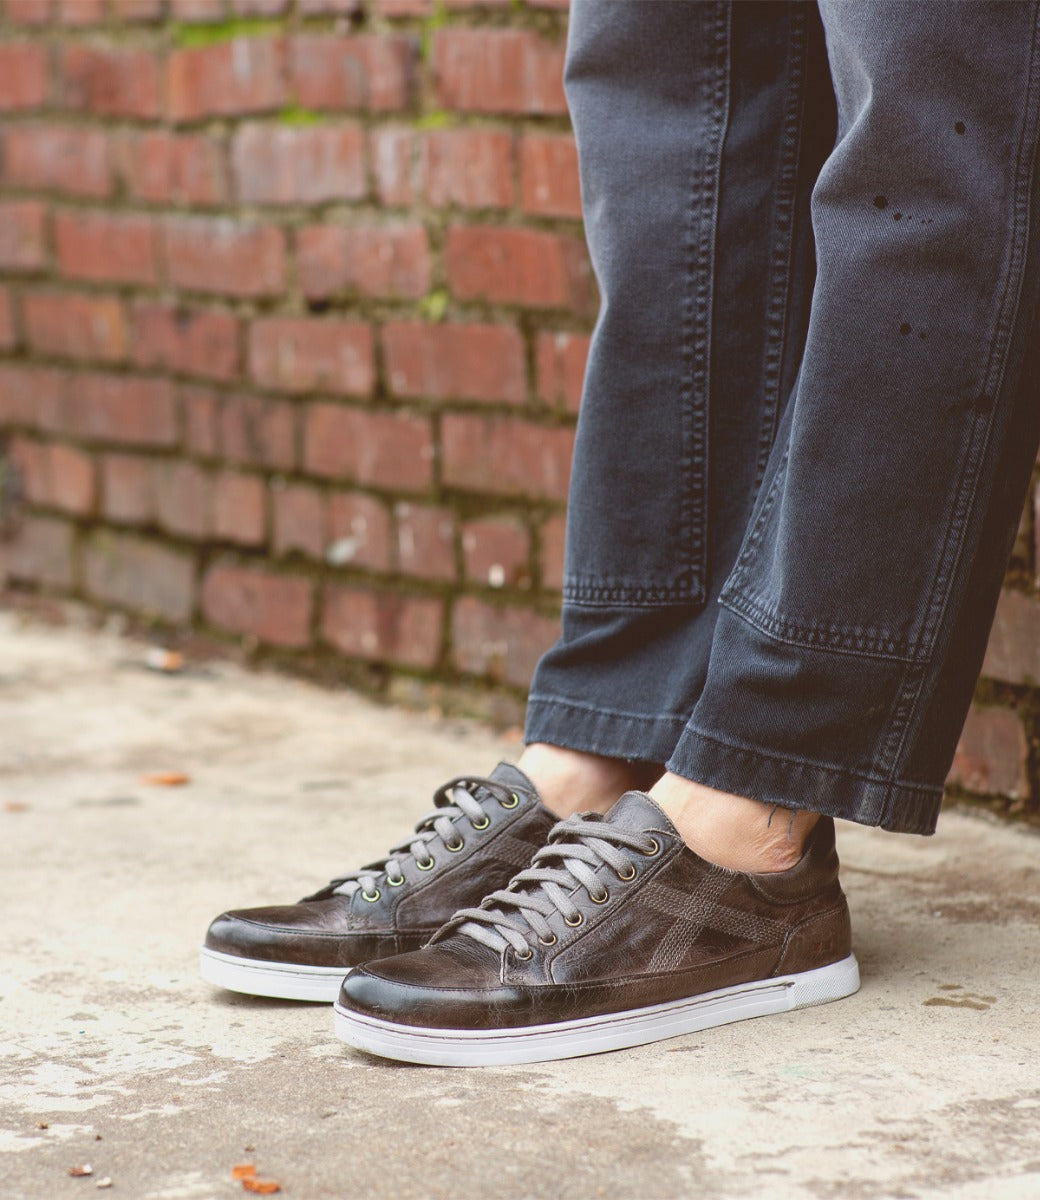 A person standing on a brick wall wearing a pair of Bed Stu sneakers.